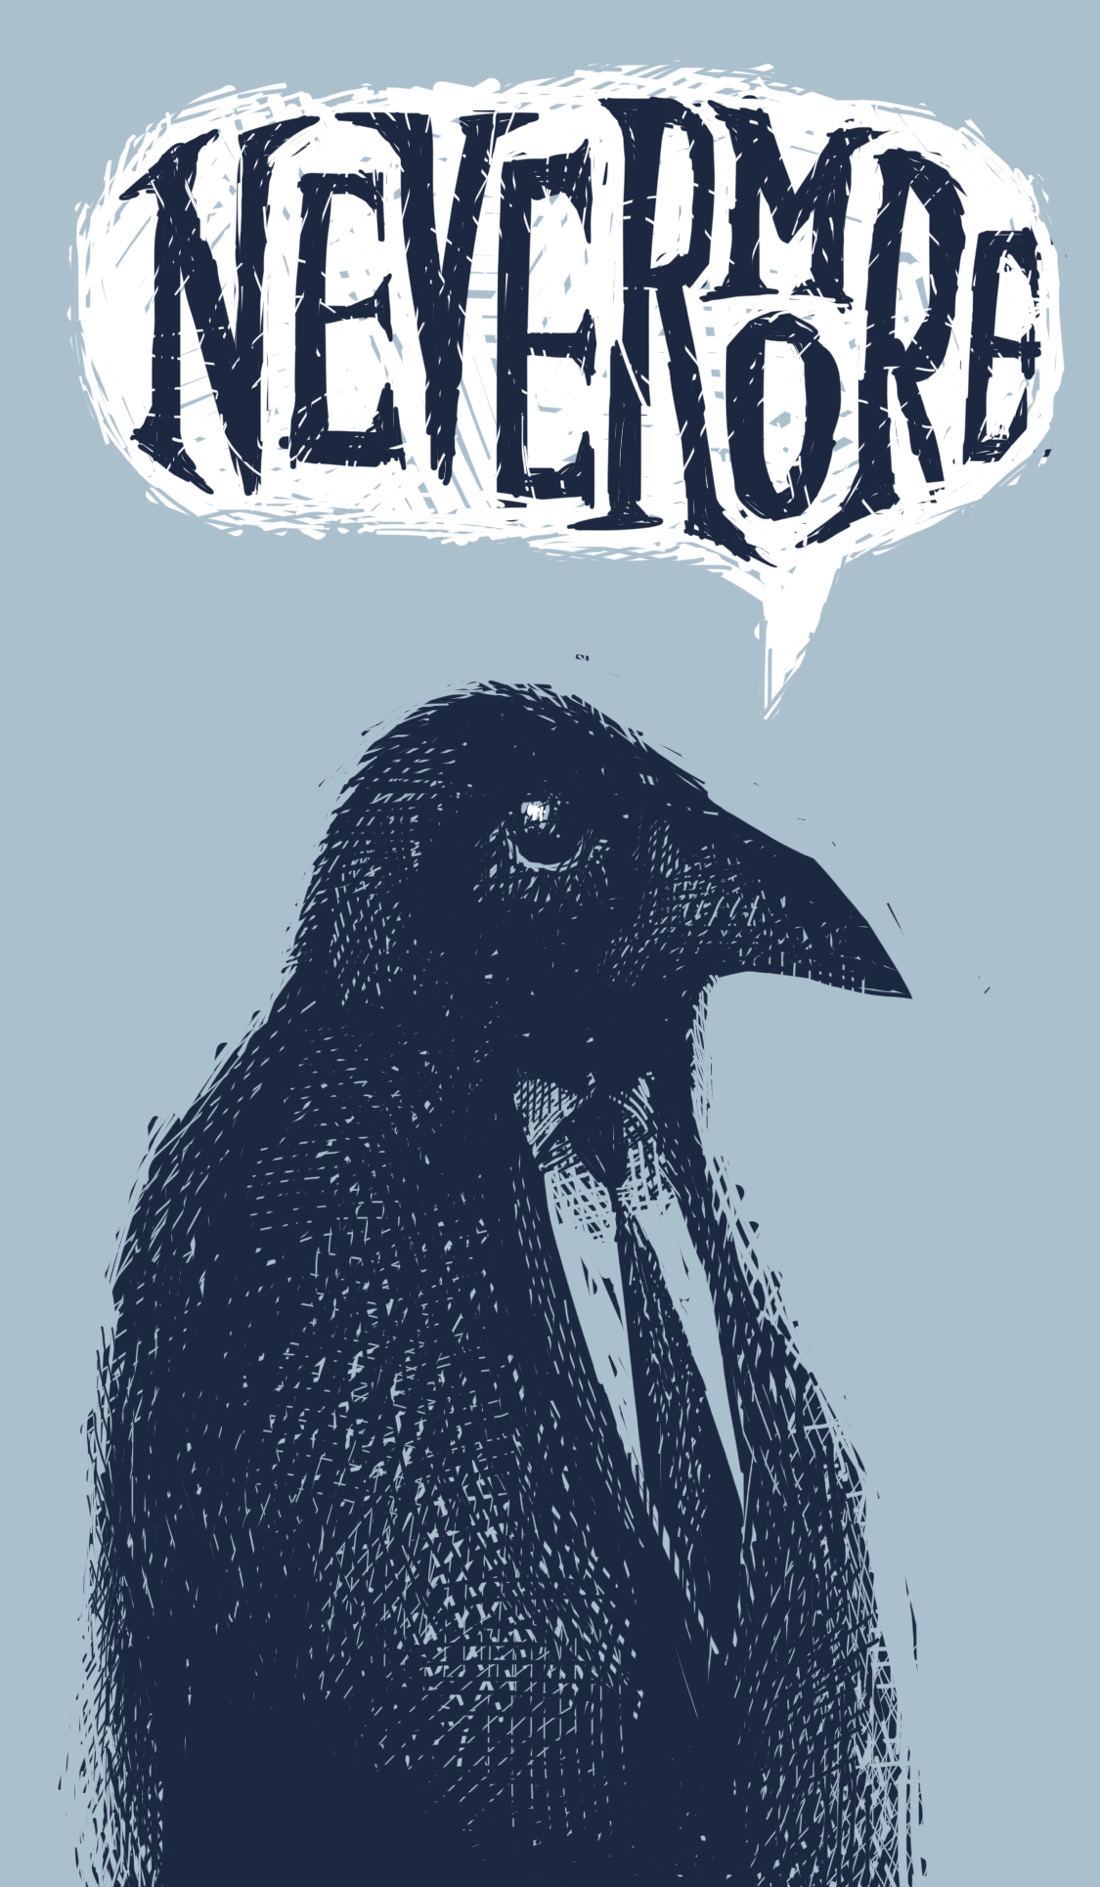 A very dapper raven wearing a suit and tie, with a speech balloon above its head containing the word "Nevermore" in spooky lettering